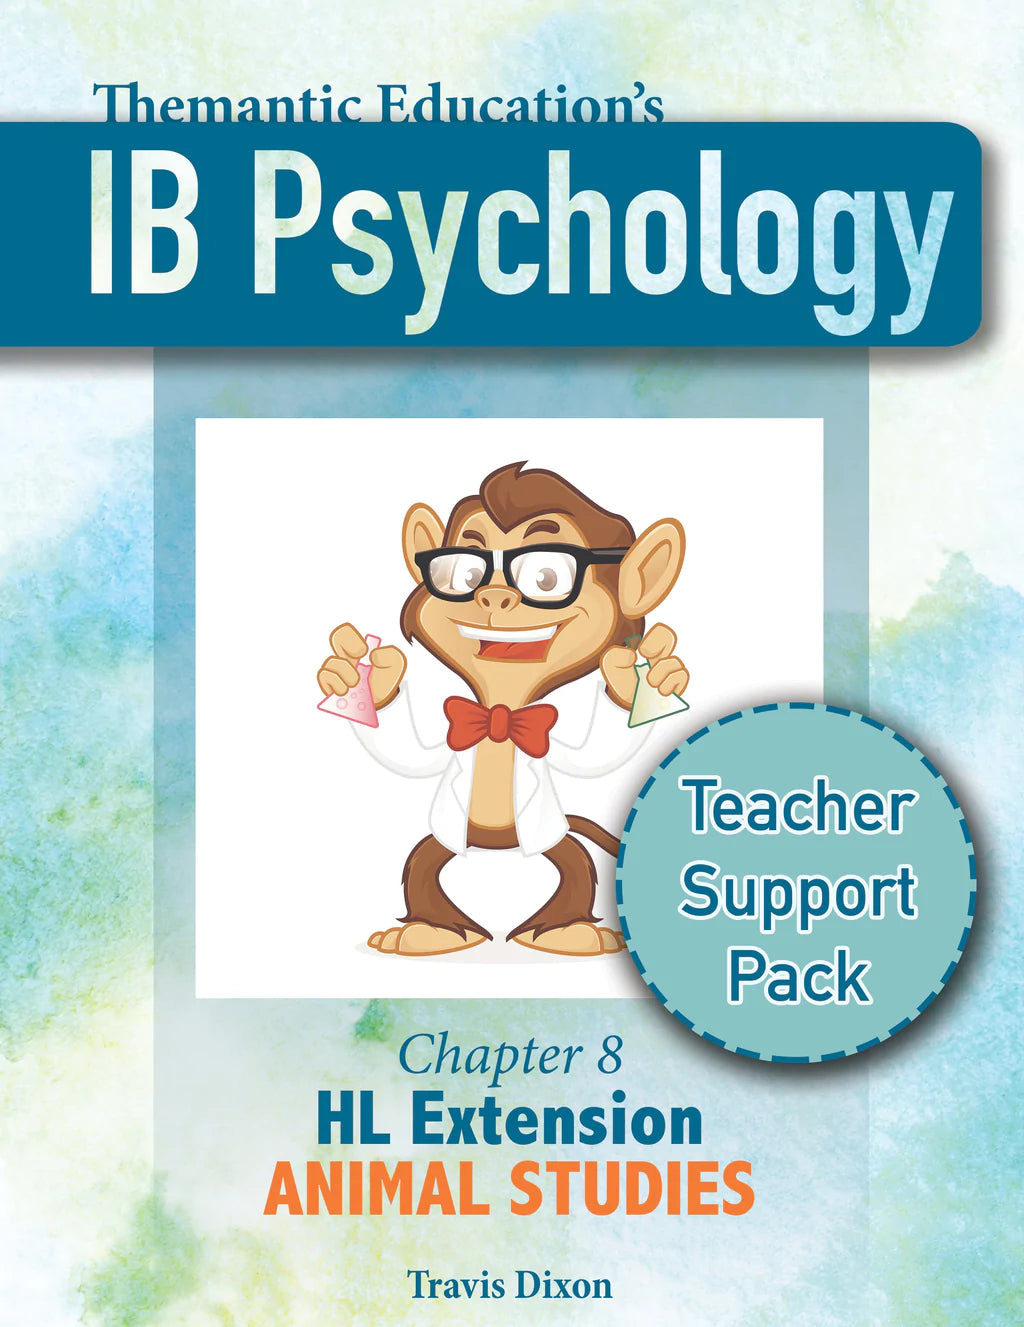 Ib Psychology Teacher Support Packs All Chapters Available Themantic Education